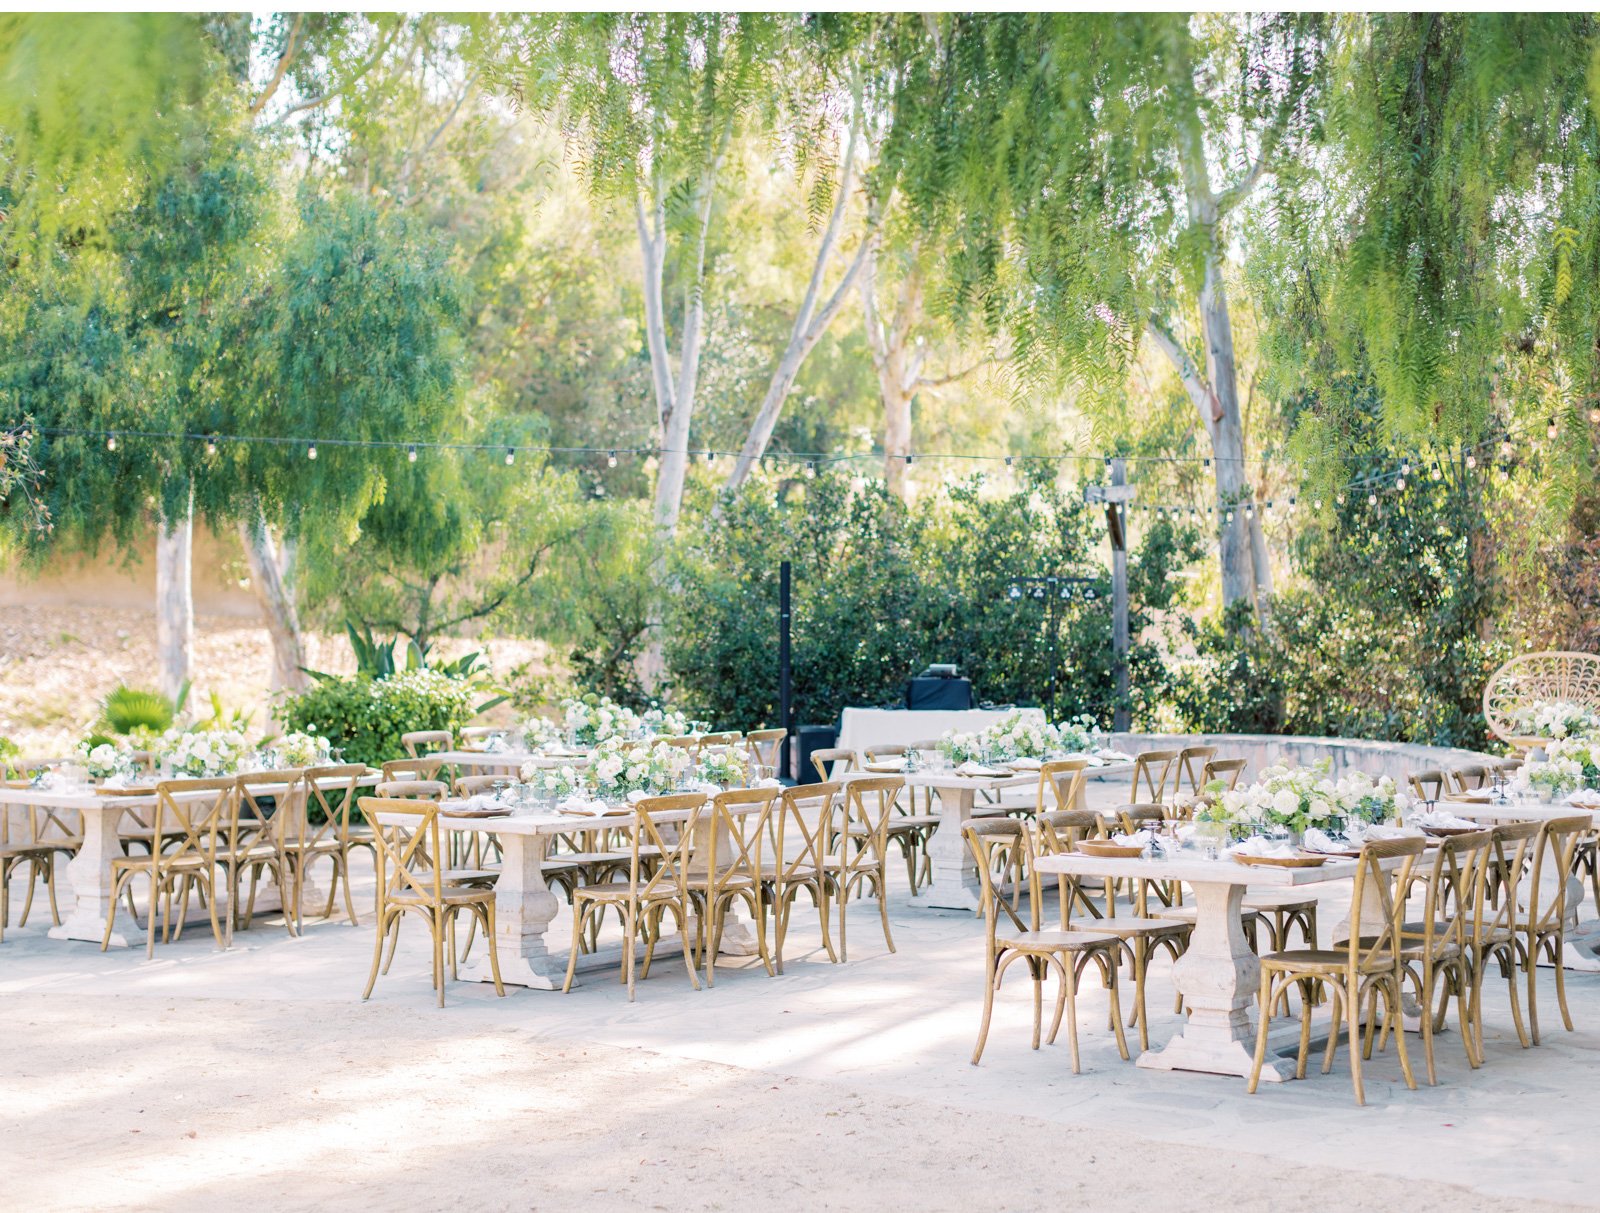 Al-Fresco-Southern-California-Weddings-Light-and-Airy-Photography-Wedding-Photographer-High-End-Wedding-Inspiration-Clean-Event-Photography_04.jpg